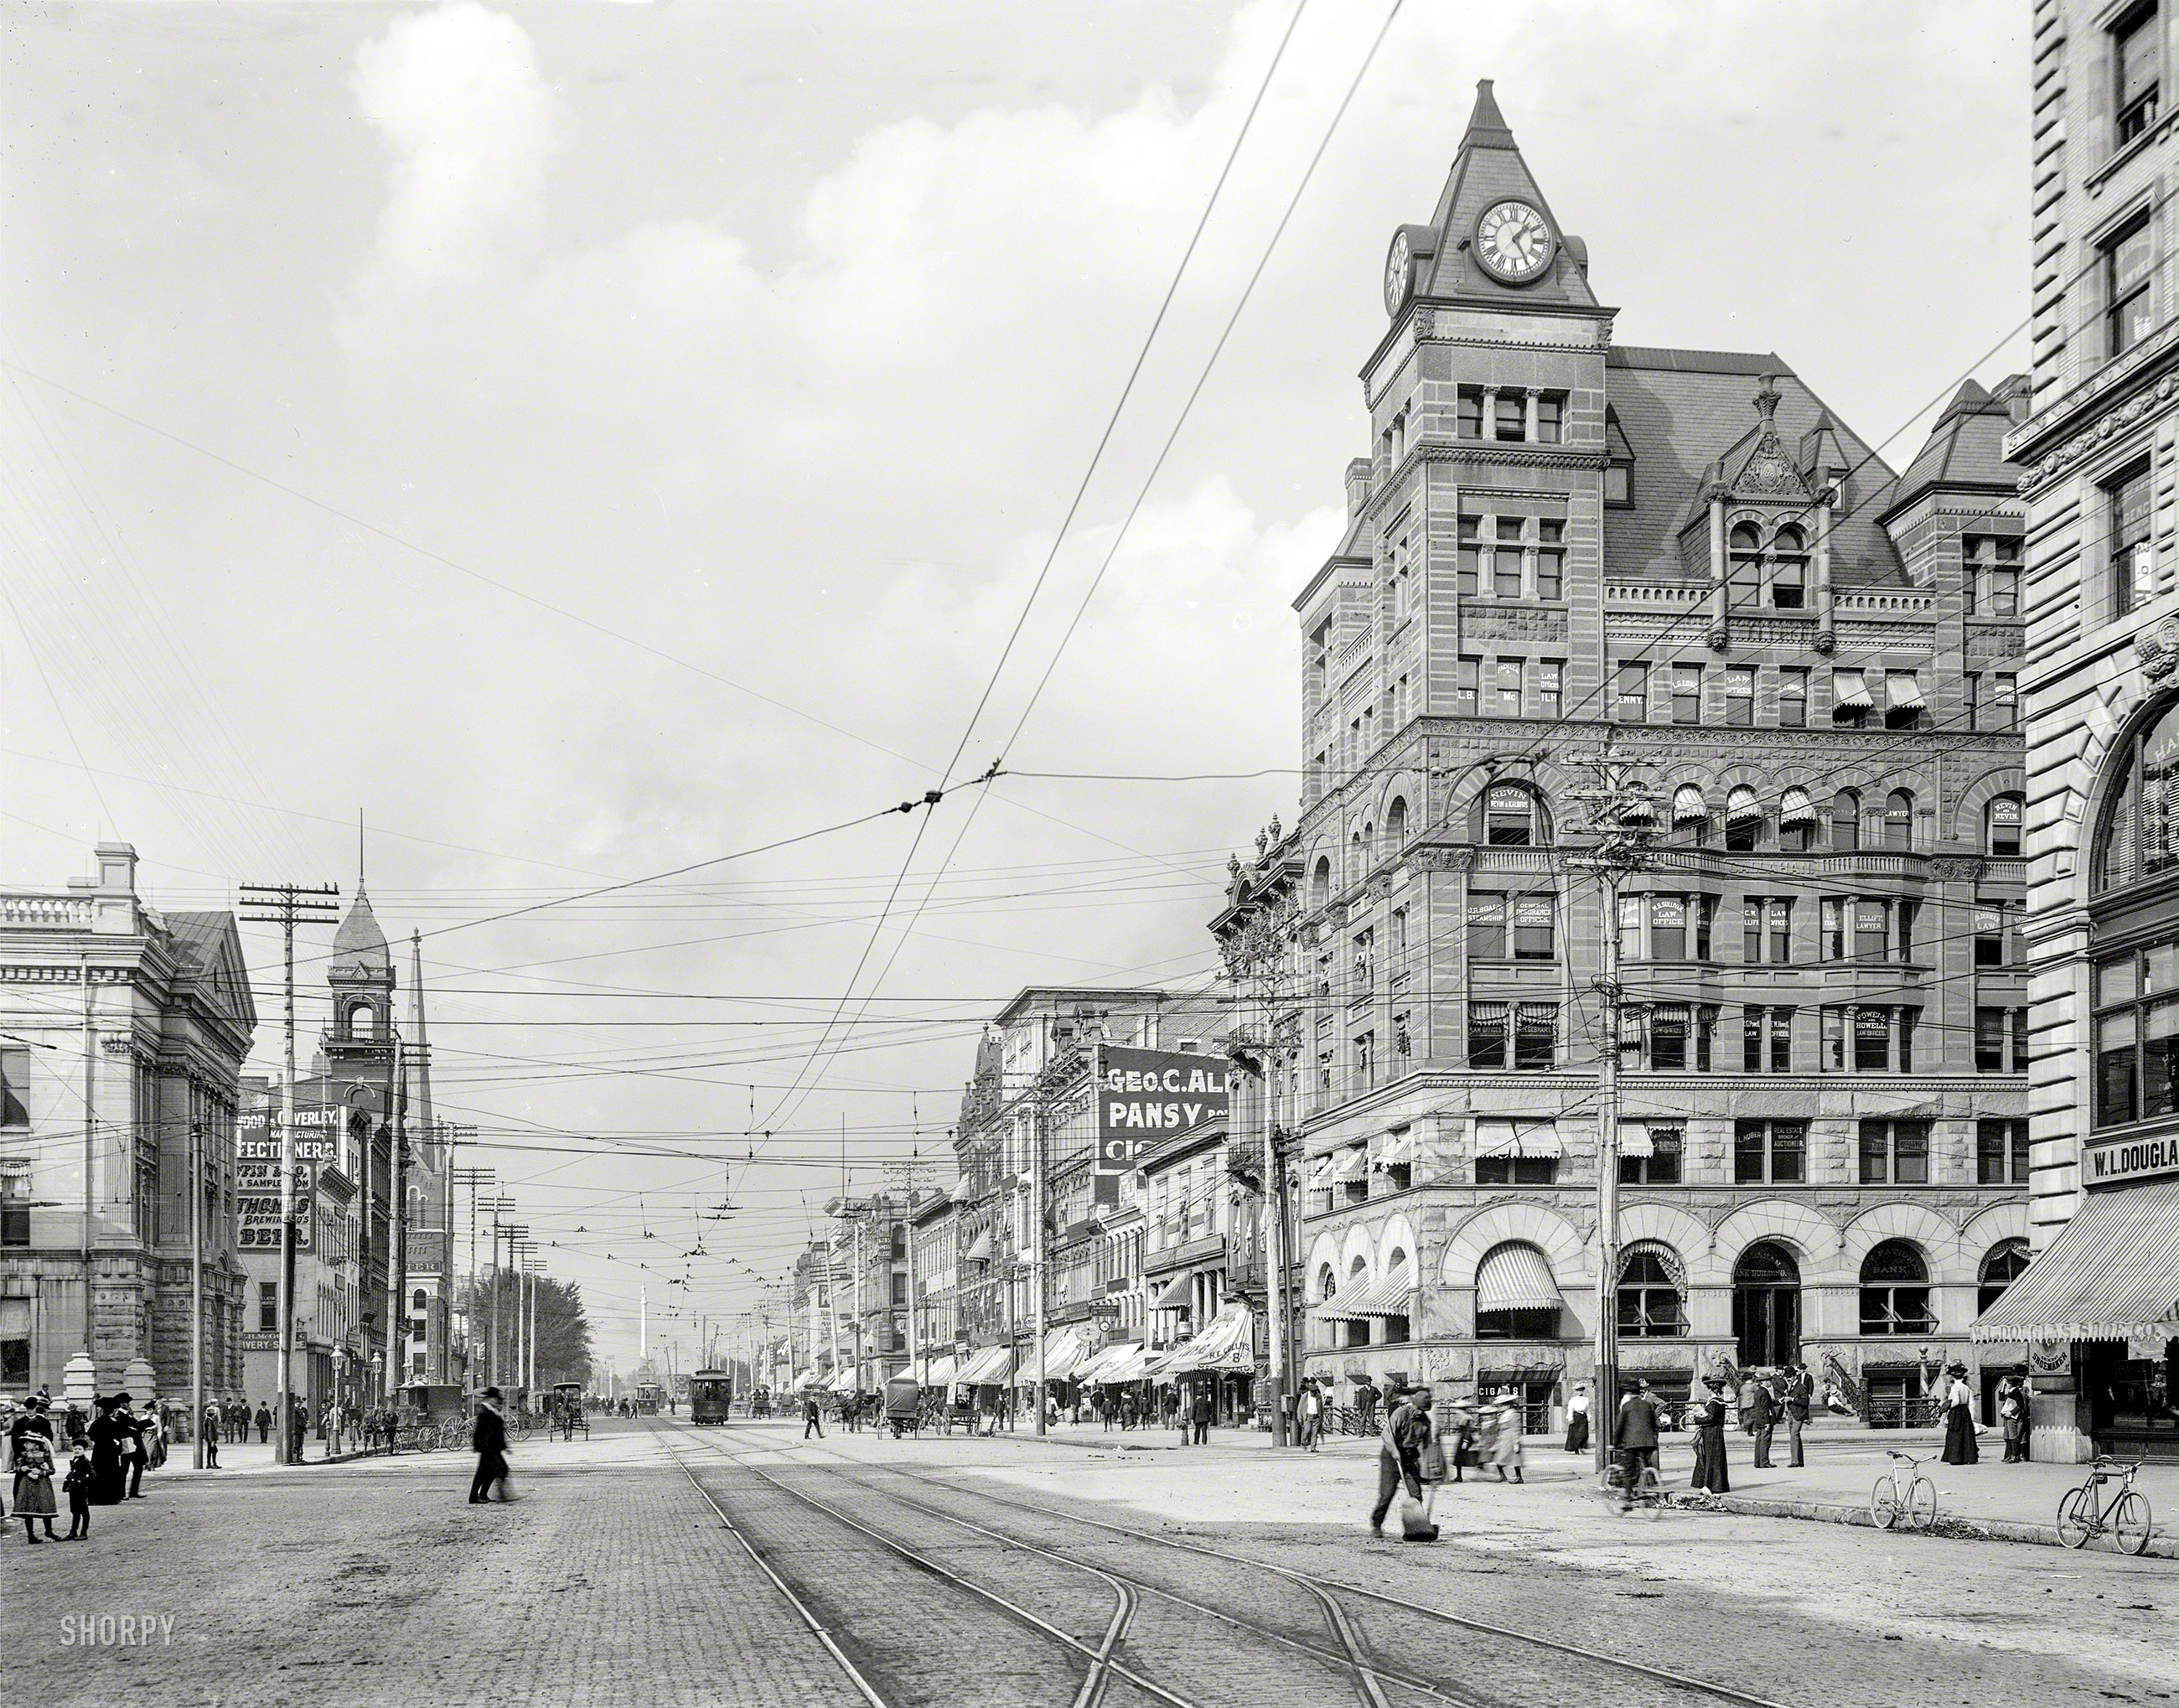 Circa 1902. "Main Street -- Dayton, O." No. 2 with a broom. 8x10 inch dry plate glass negative, Detroit Publishing Company. View full size.